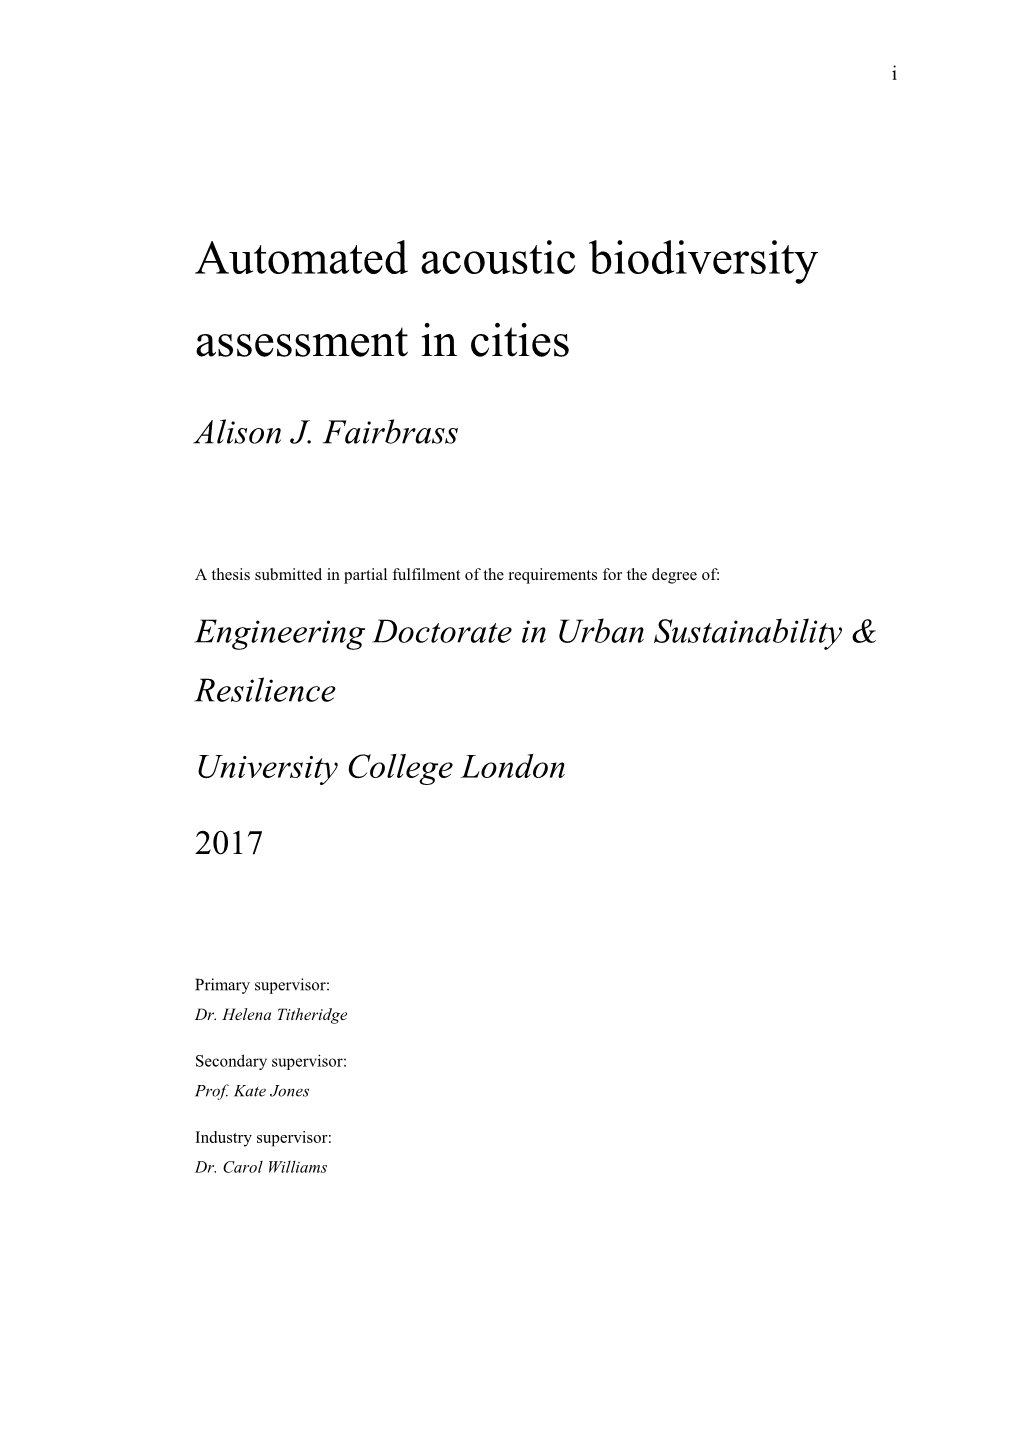 Automated Acoustic Biodiversity Assessment in Cities